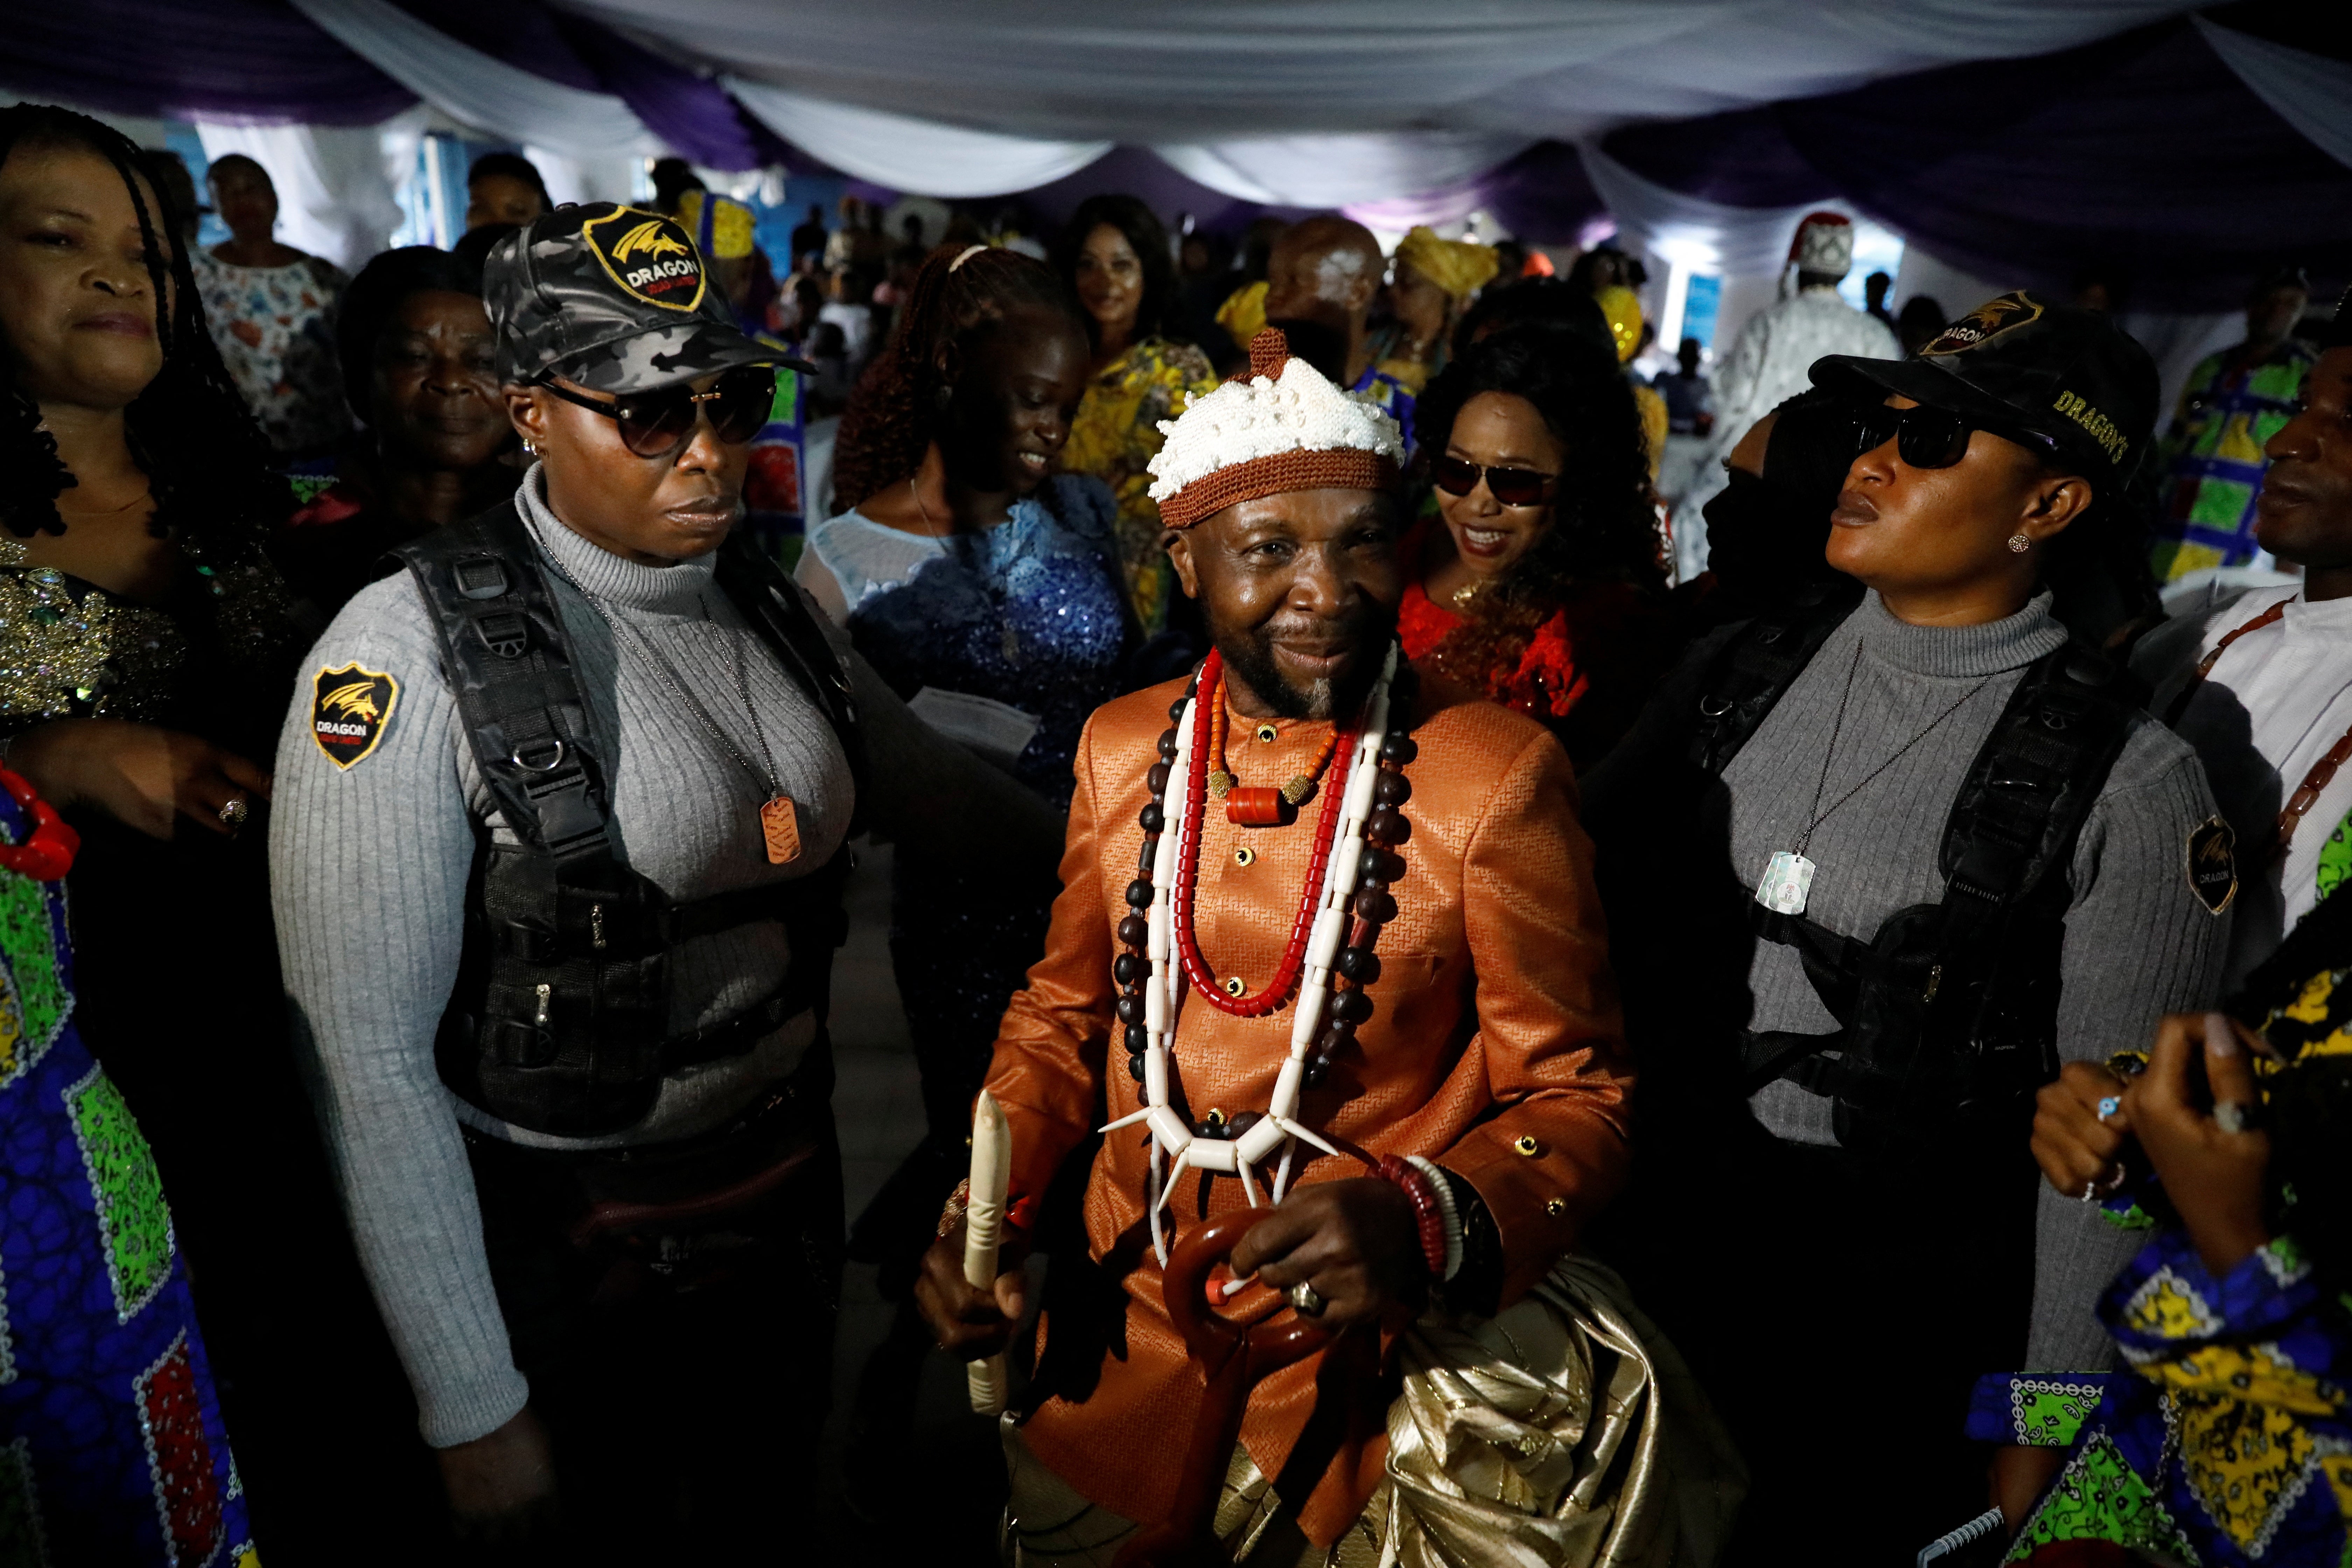 Esther Brown and Ukeme Tom guard newly crowned king Obong Ibanga Ikpe at his coronation ceremony